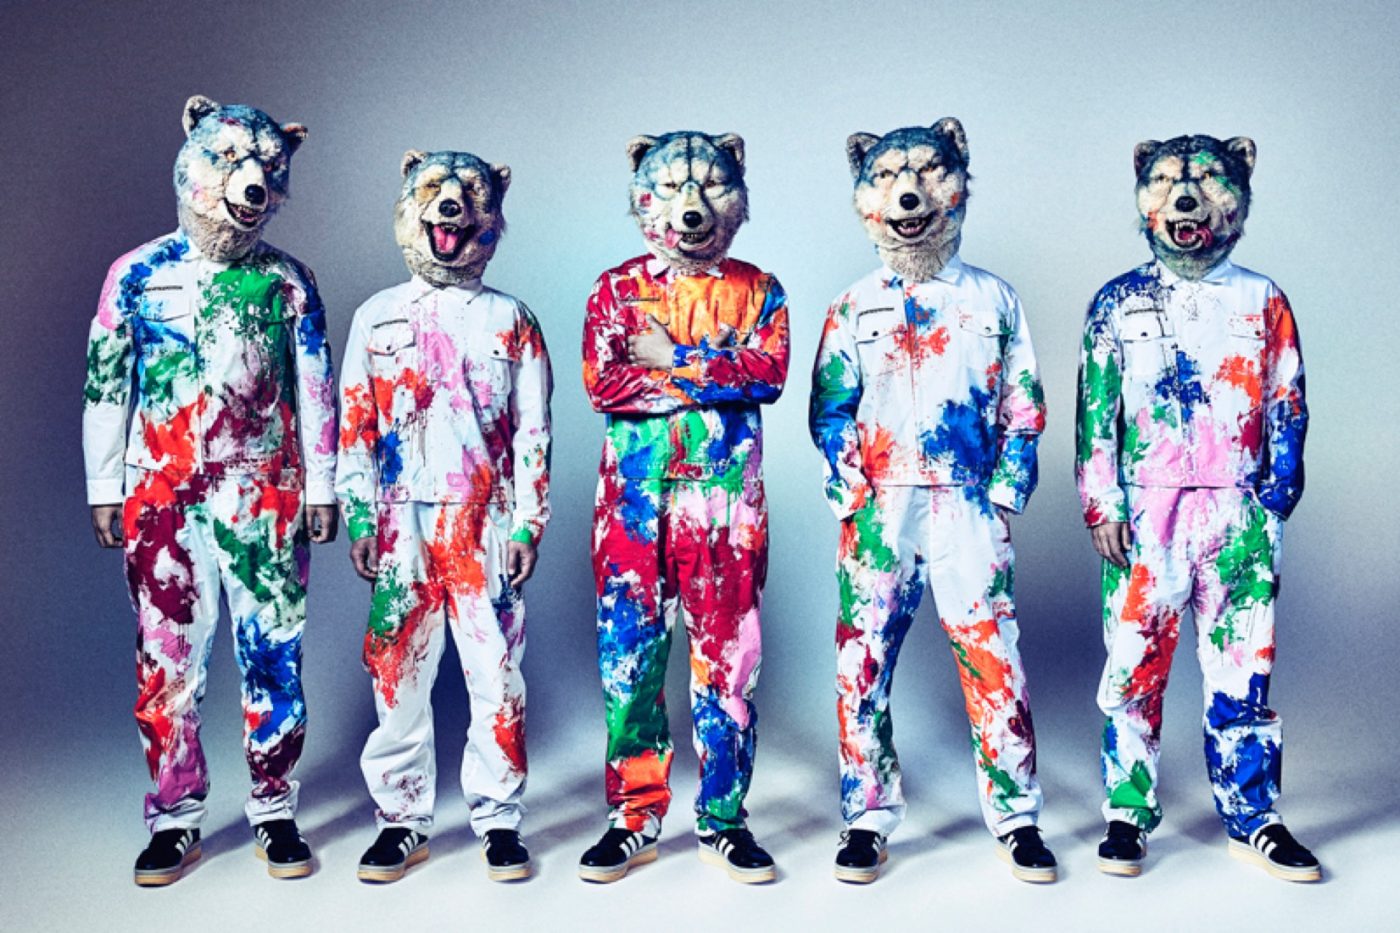 MAN WITH A MISSION、連続アルバム第2弾の発売＆全国ツアー開催決定 - 画像一覧（1/1）